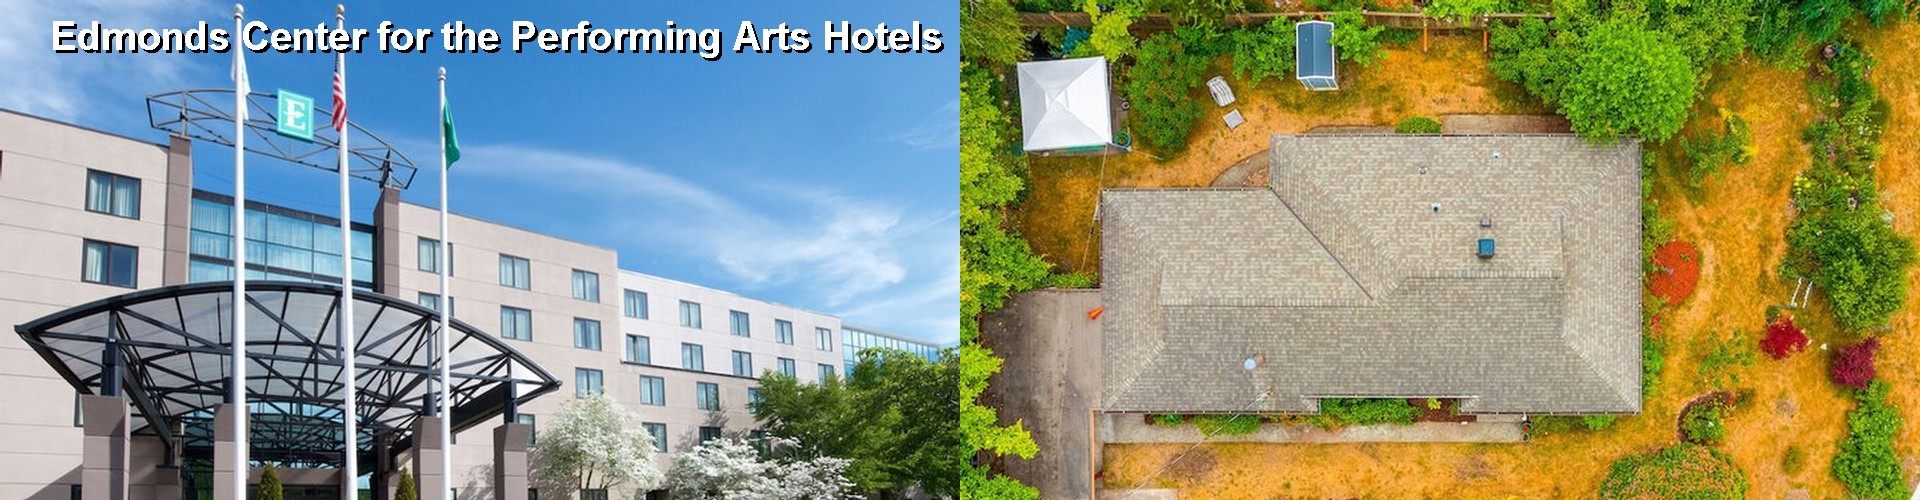 4 Best Hotels near Edmonds Center for the Performing Arts